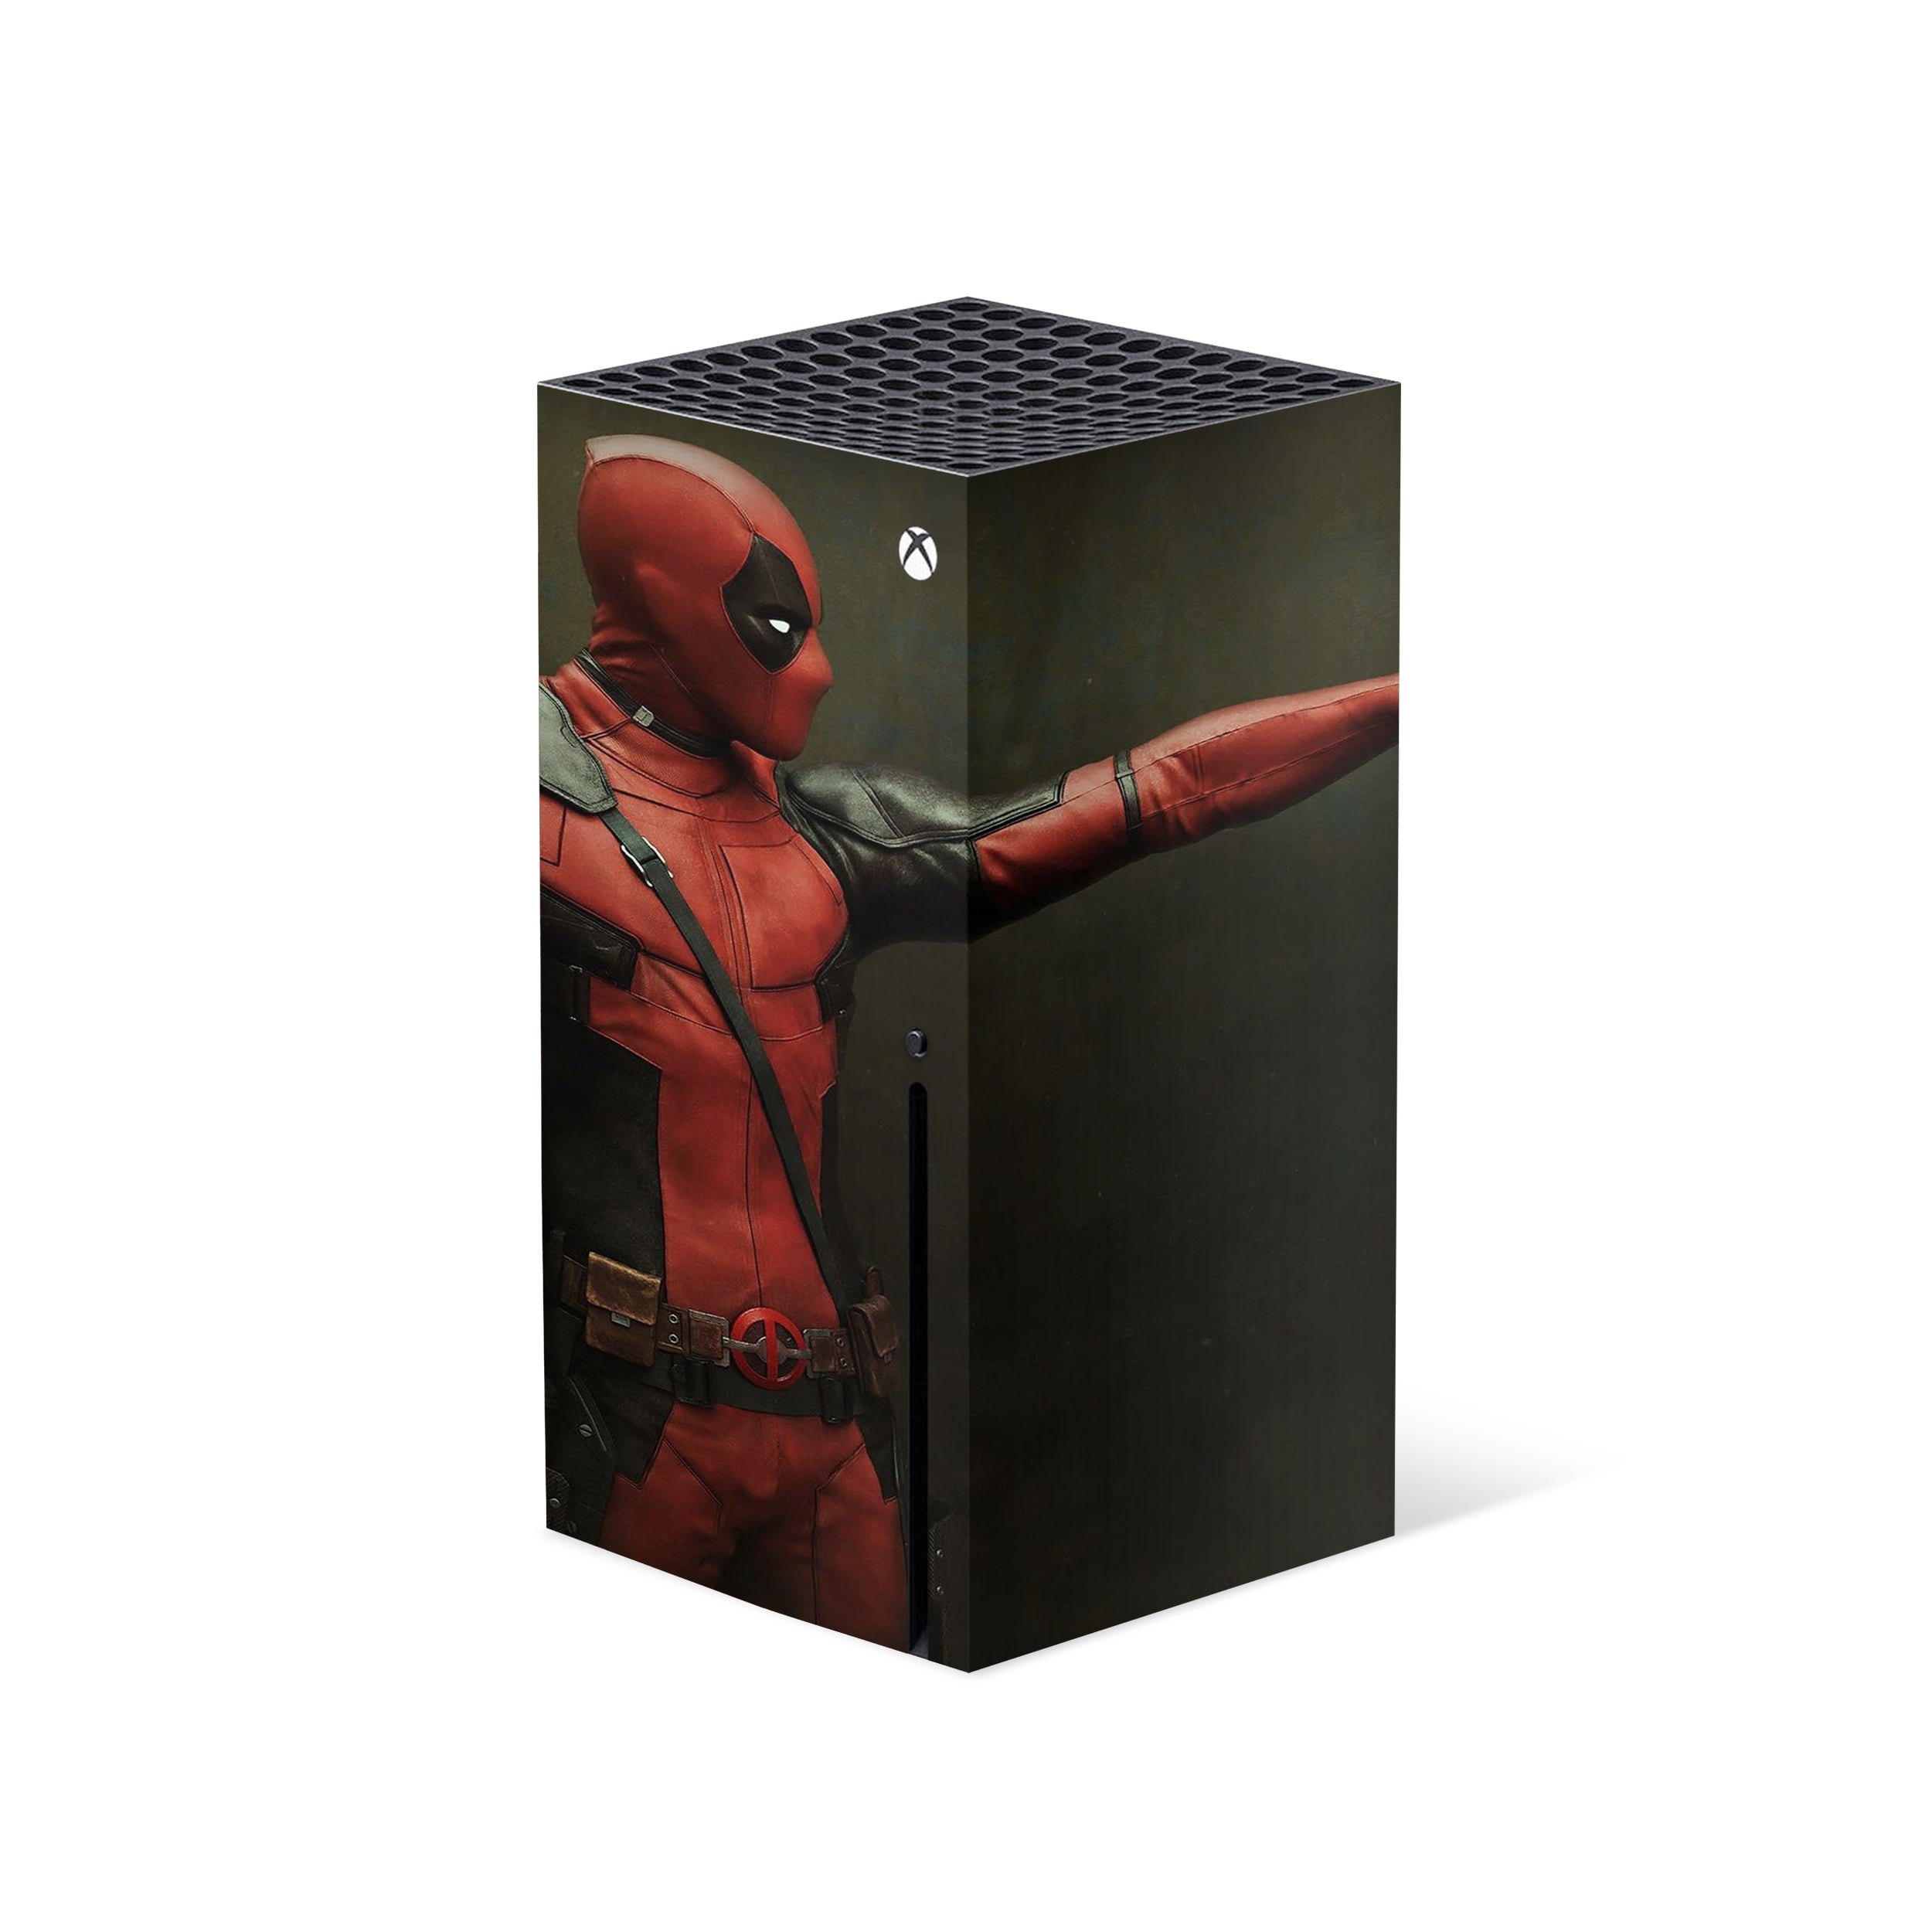 A video game skin featuring a Marvel Dead Pool design for the Xbox Series X.